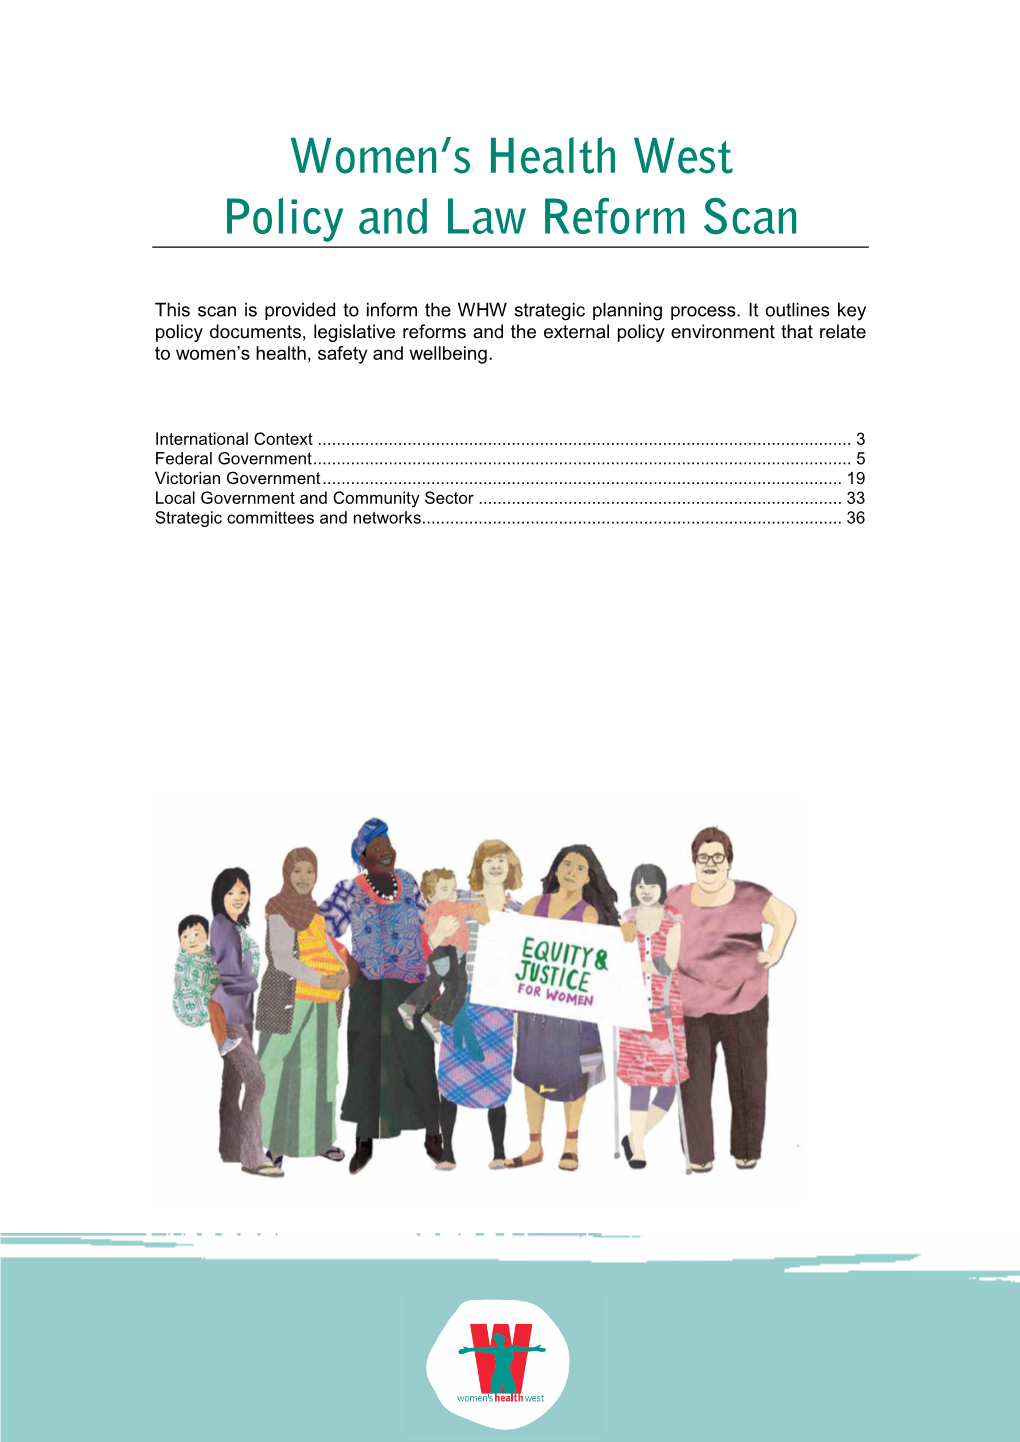 Women's Health West Quarterly Policy and Law Reform Scan